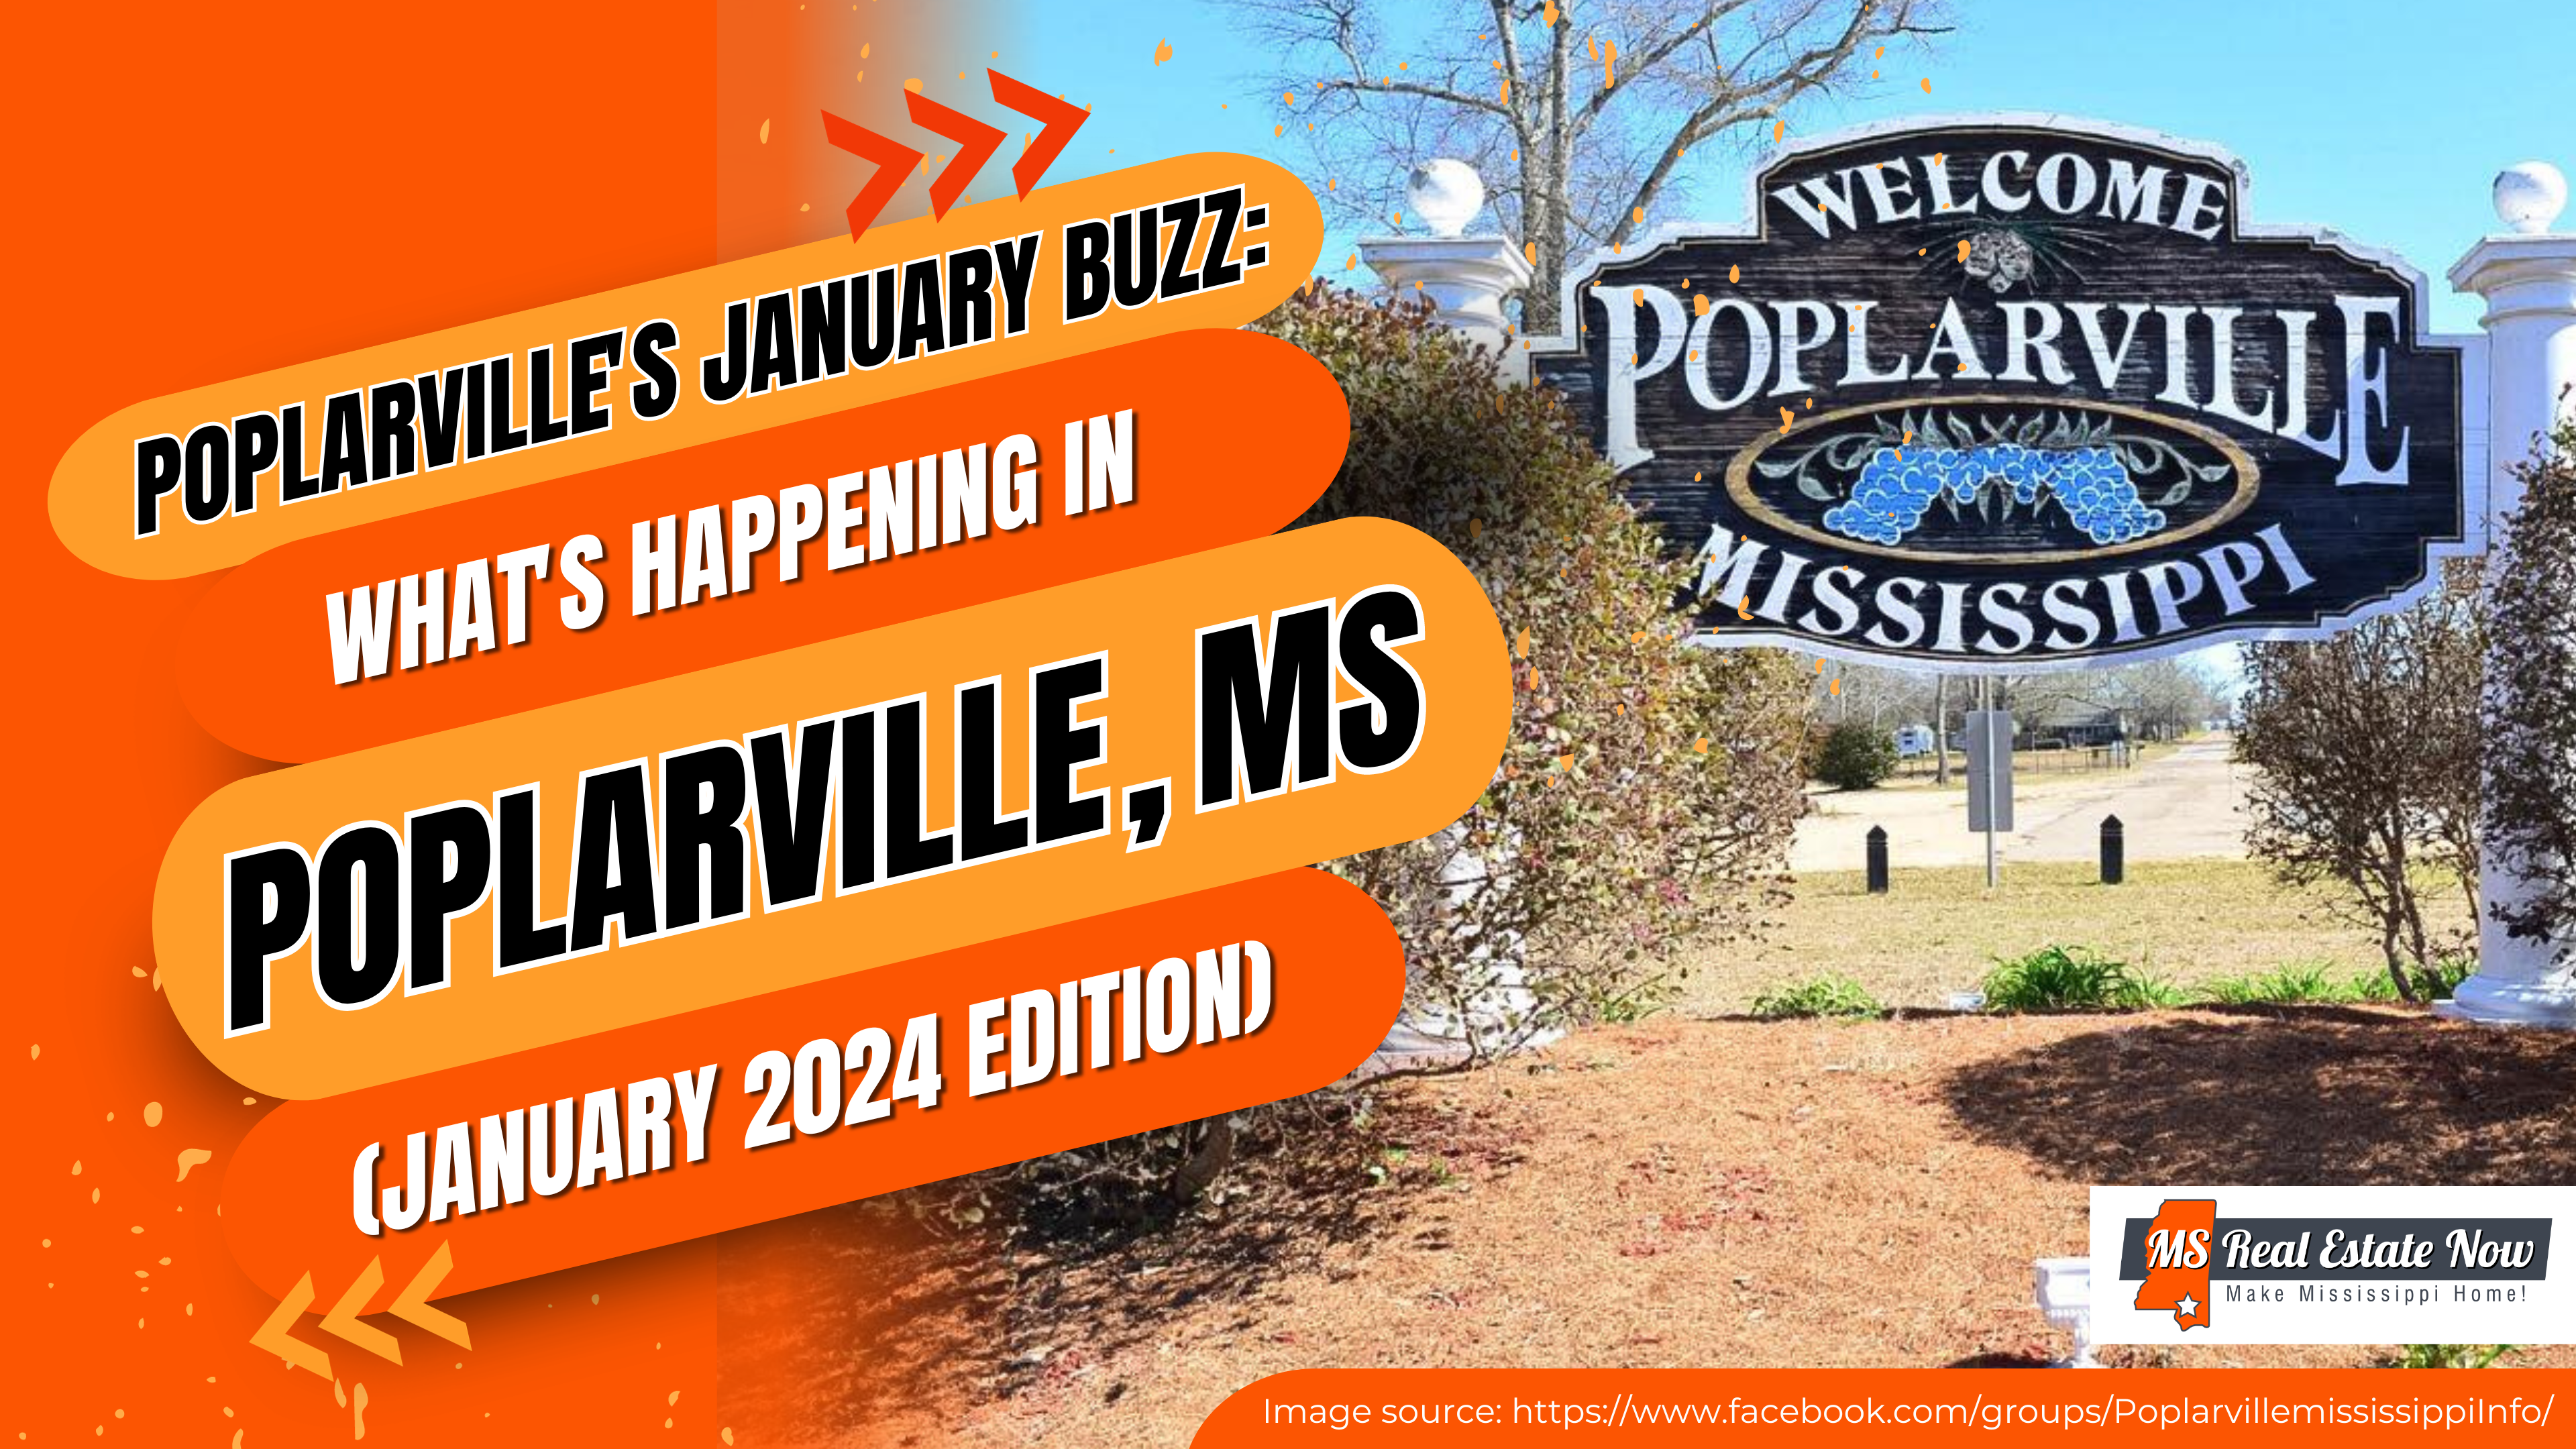 Poplarville’s January Buzz: What’s Happening in Poplarville, MS (January 2024 Edition)